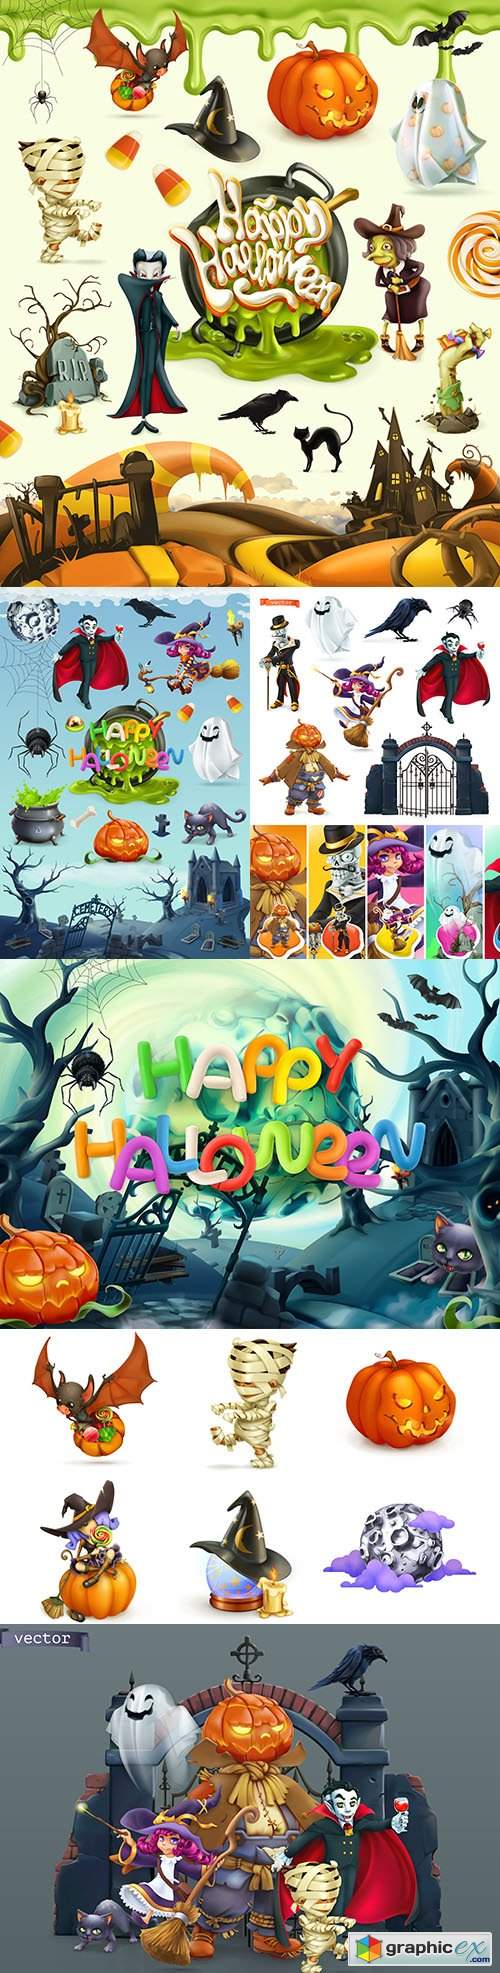  Happy Halloween and cartoon heroes 3rd realistic illustrations 